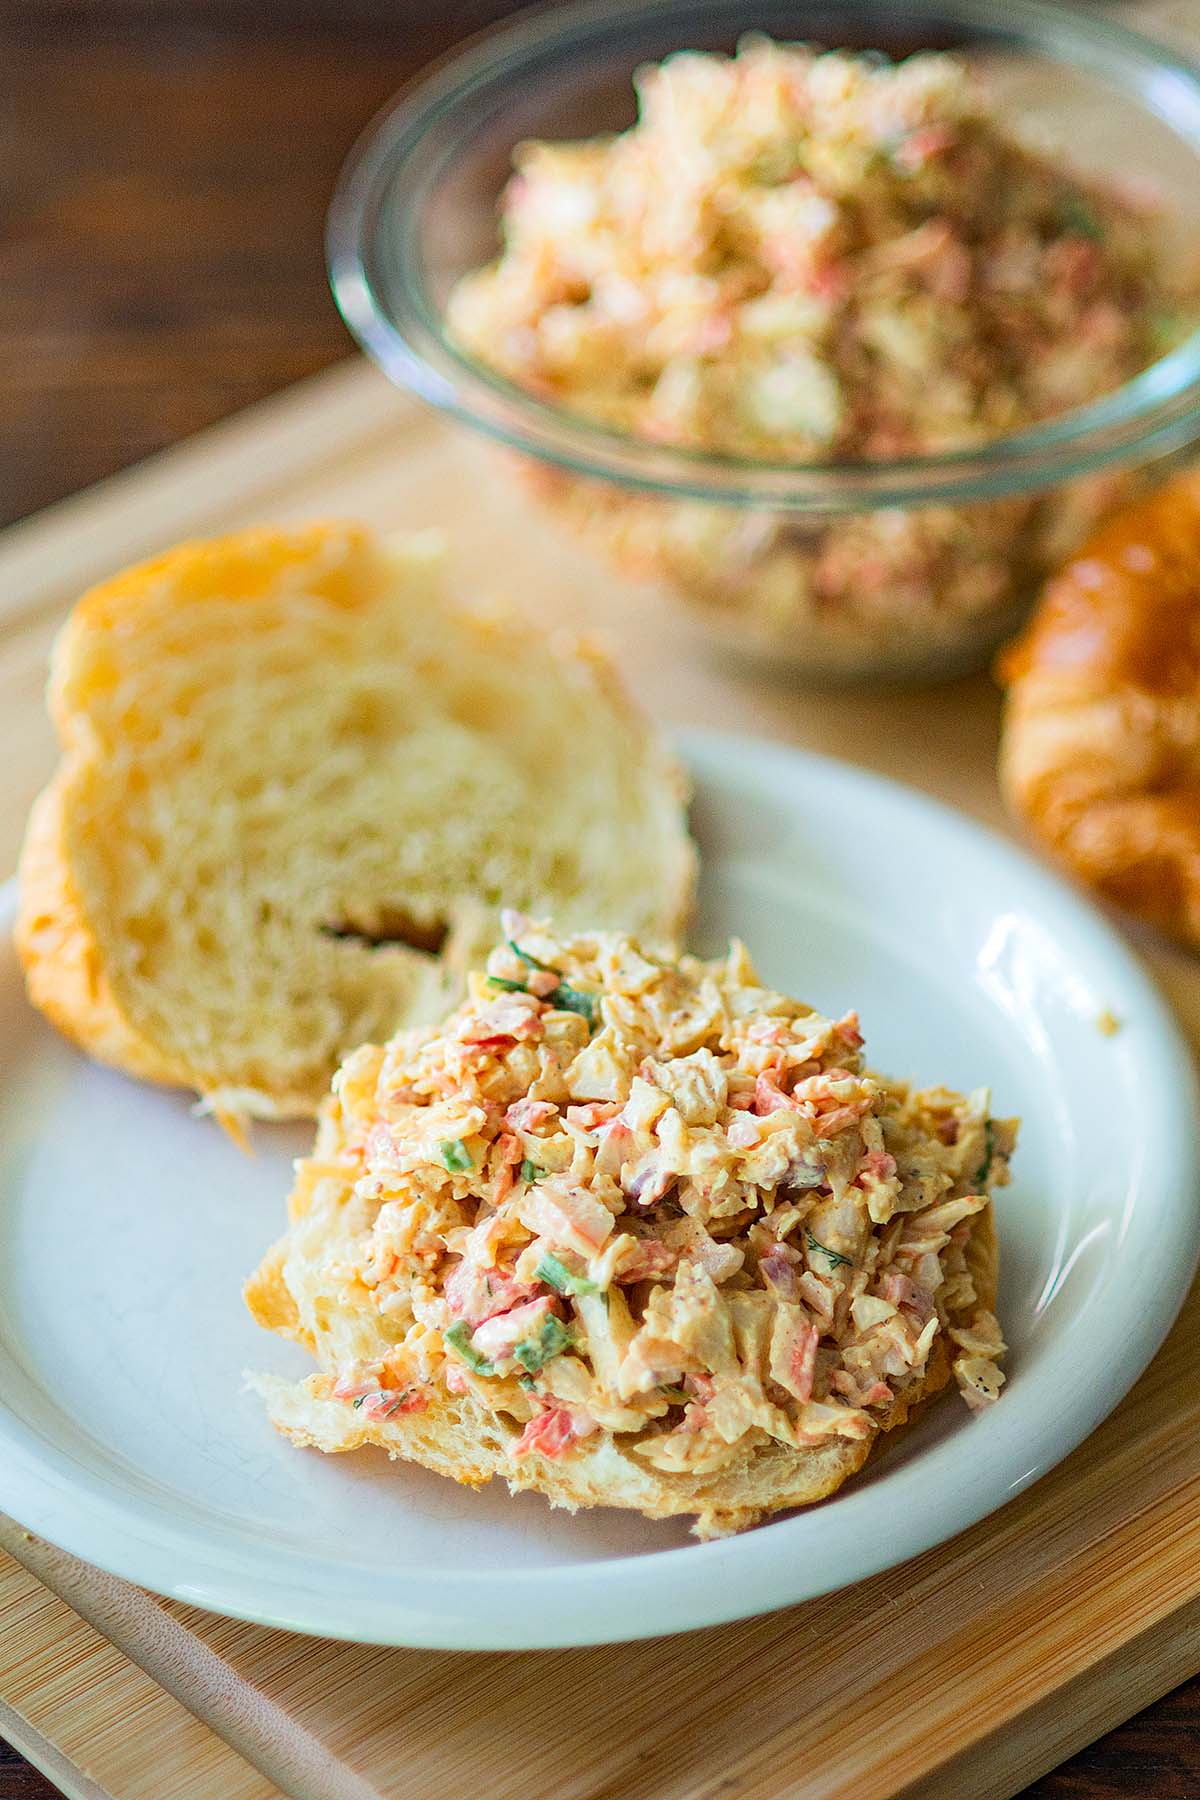 Crab Salad served on a croissant.